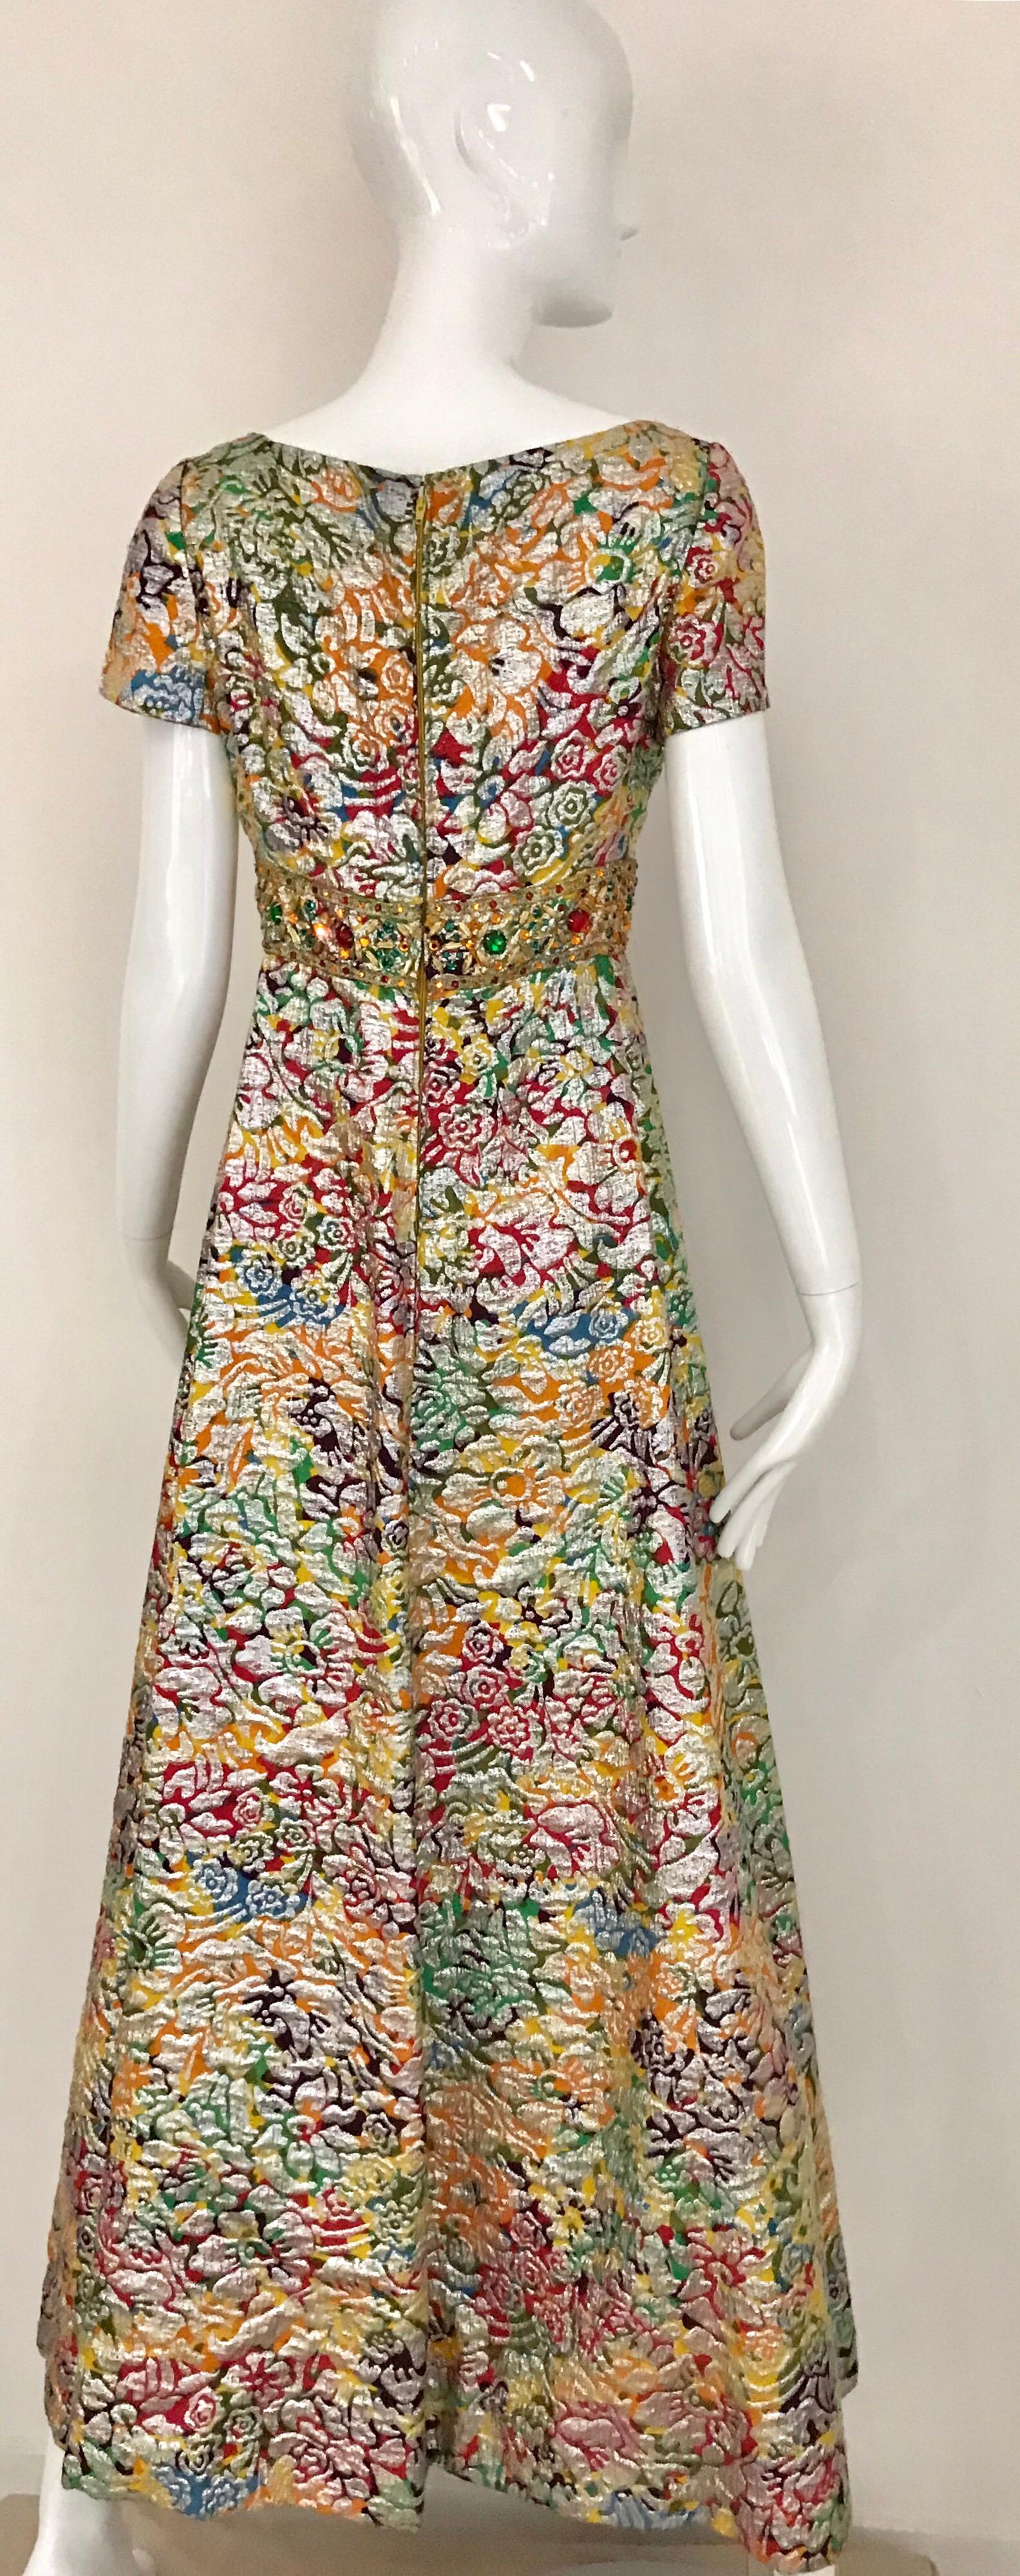 1960s Multi Color Metallic Silk Brocade Dress with Embellishment In Good Condition For Sale In Beverly Hills, CA